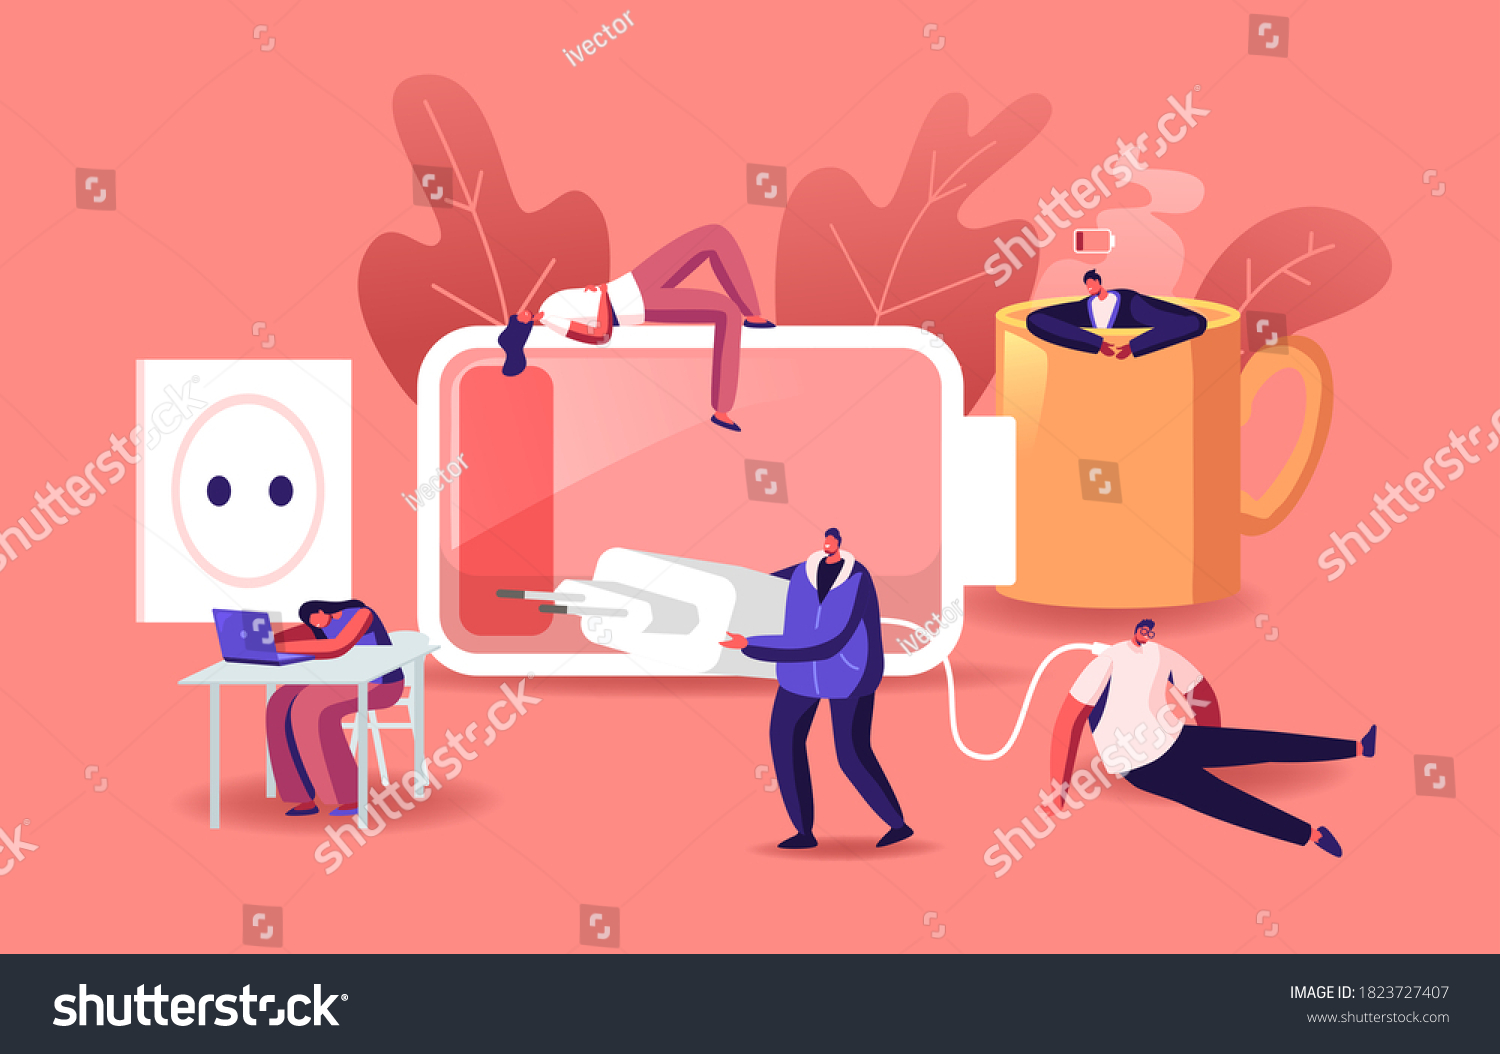 Fatigue Low Energy Working Burnout Concept Stock Vector Royalty Free 1823727407